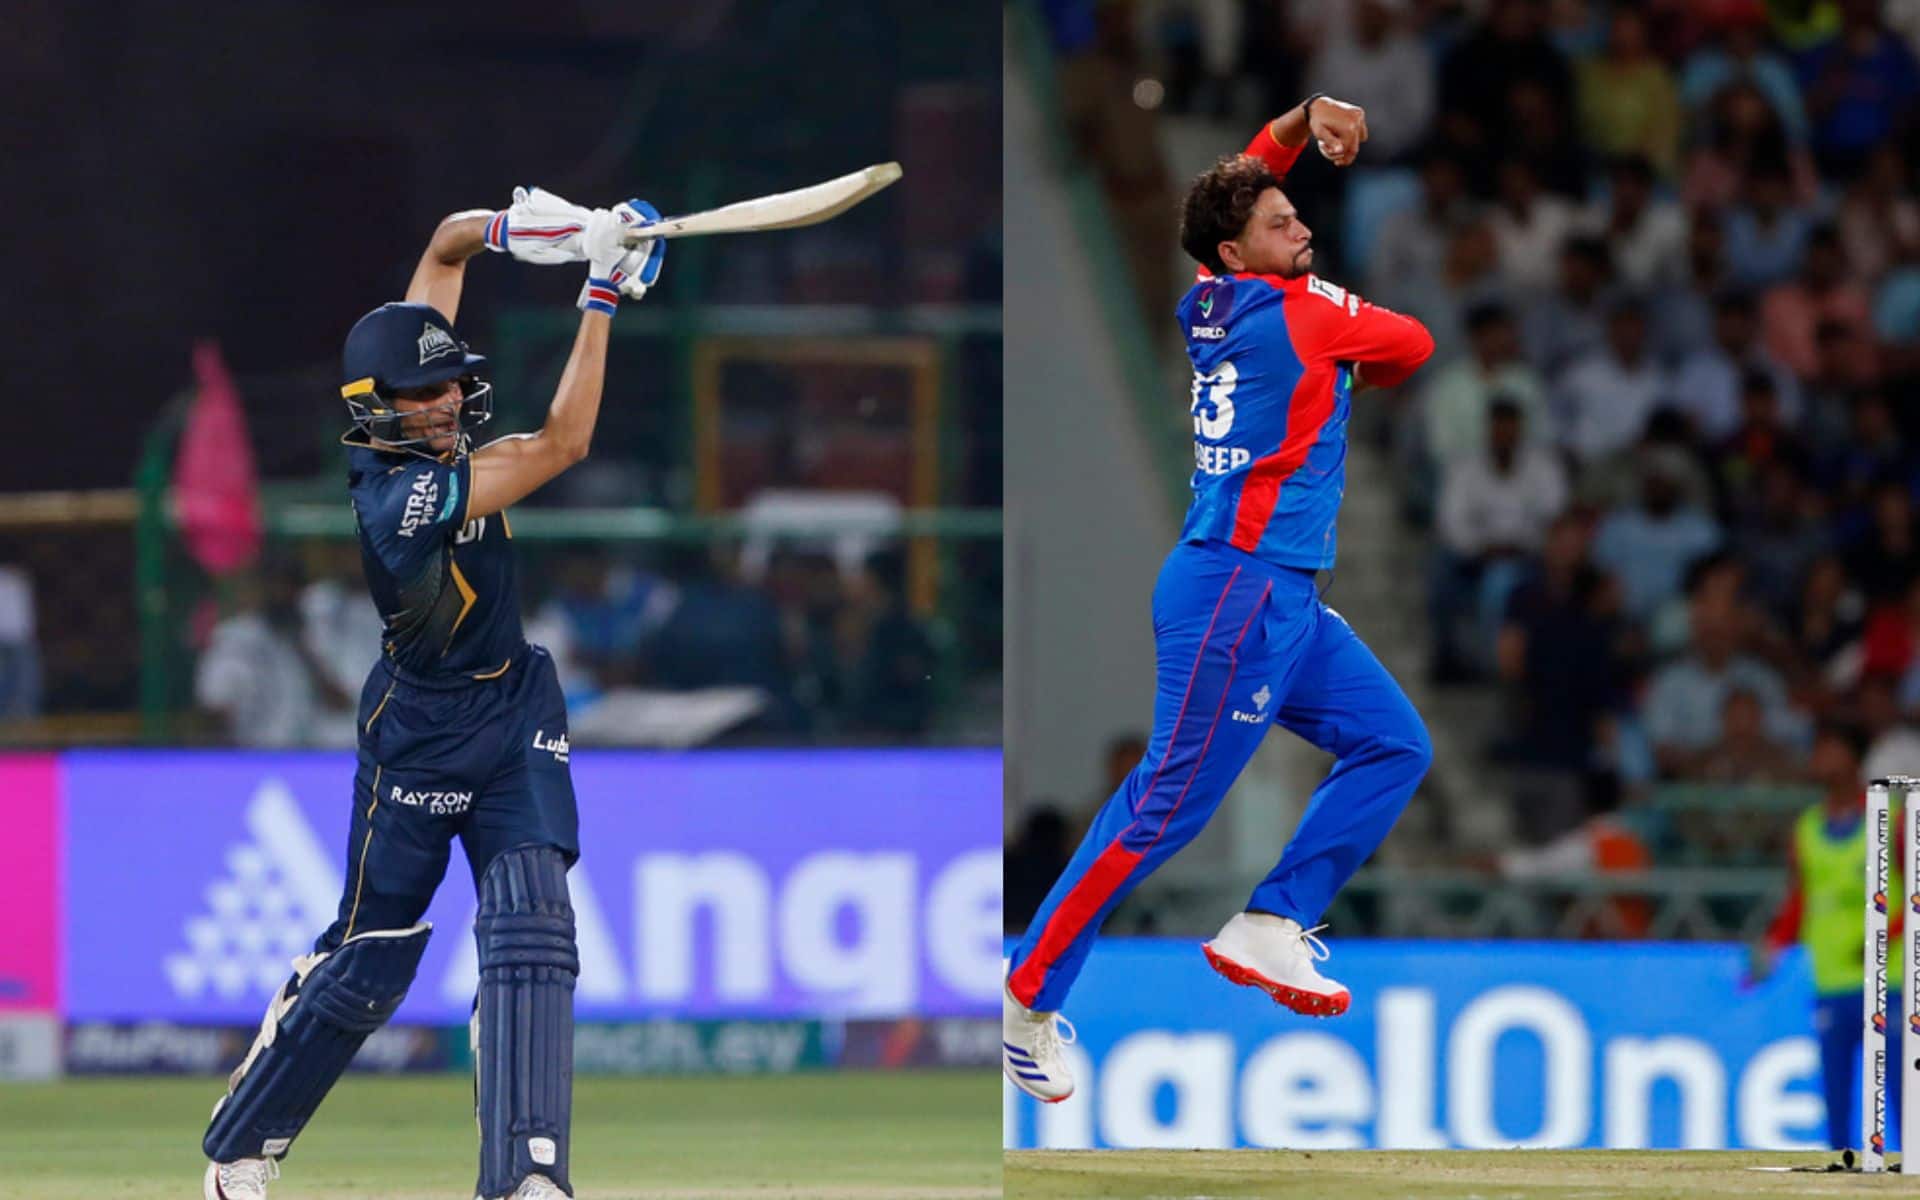 Shubman Gill and Kuldeep Yadav will be important for the team's chances in the match [AP Photos]